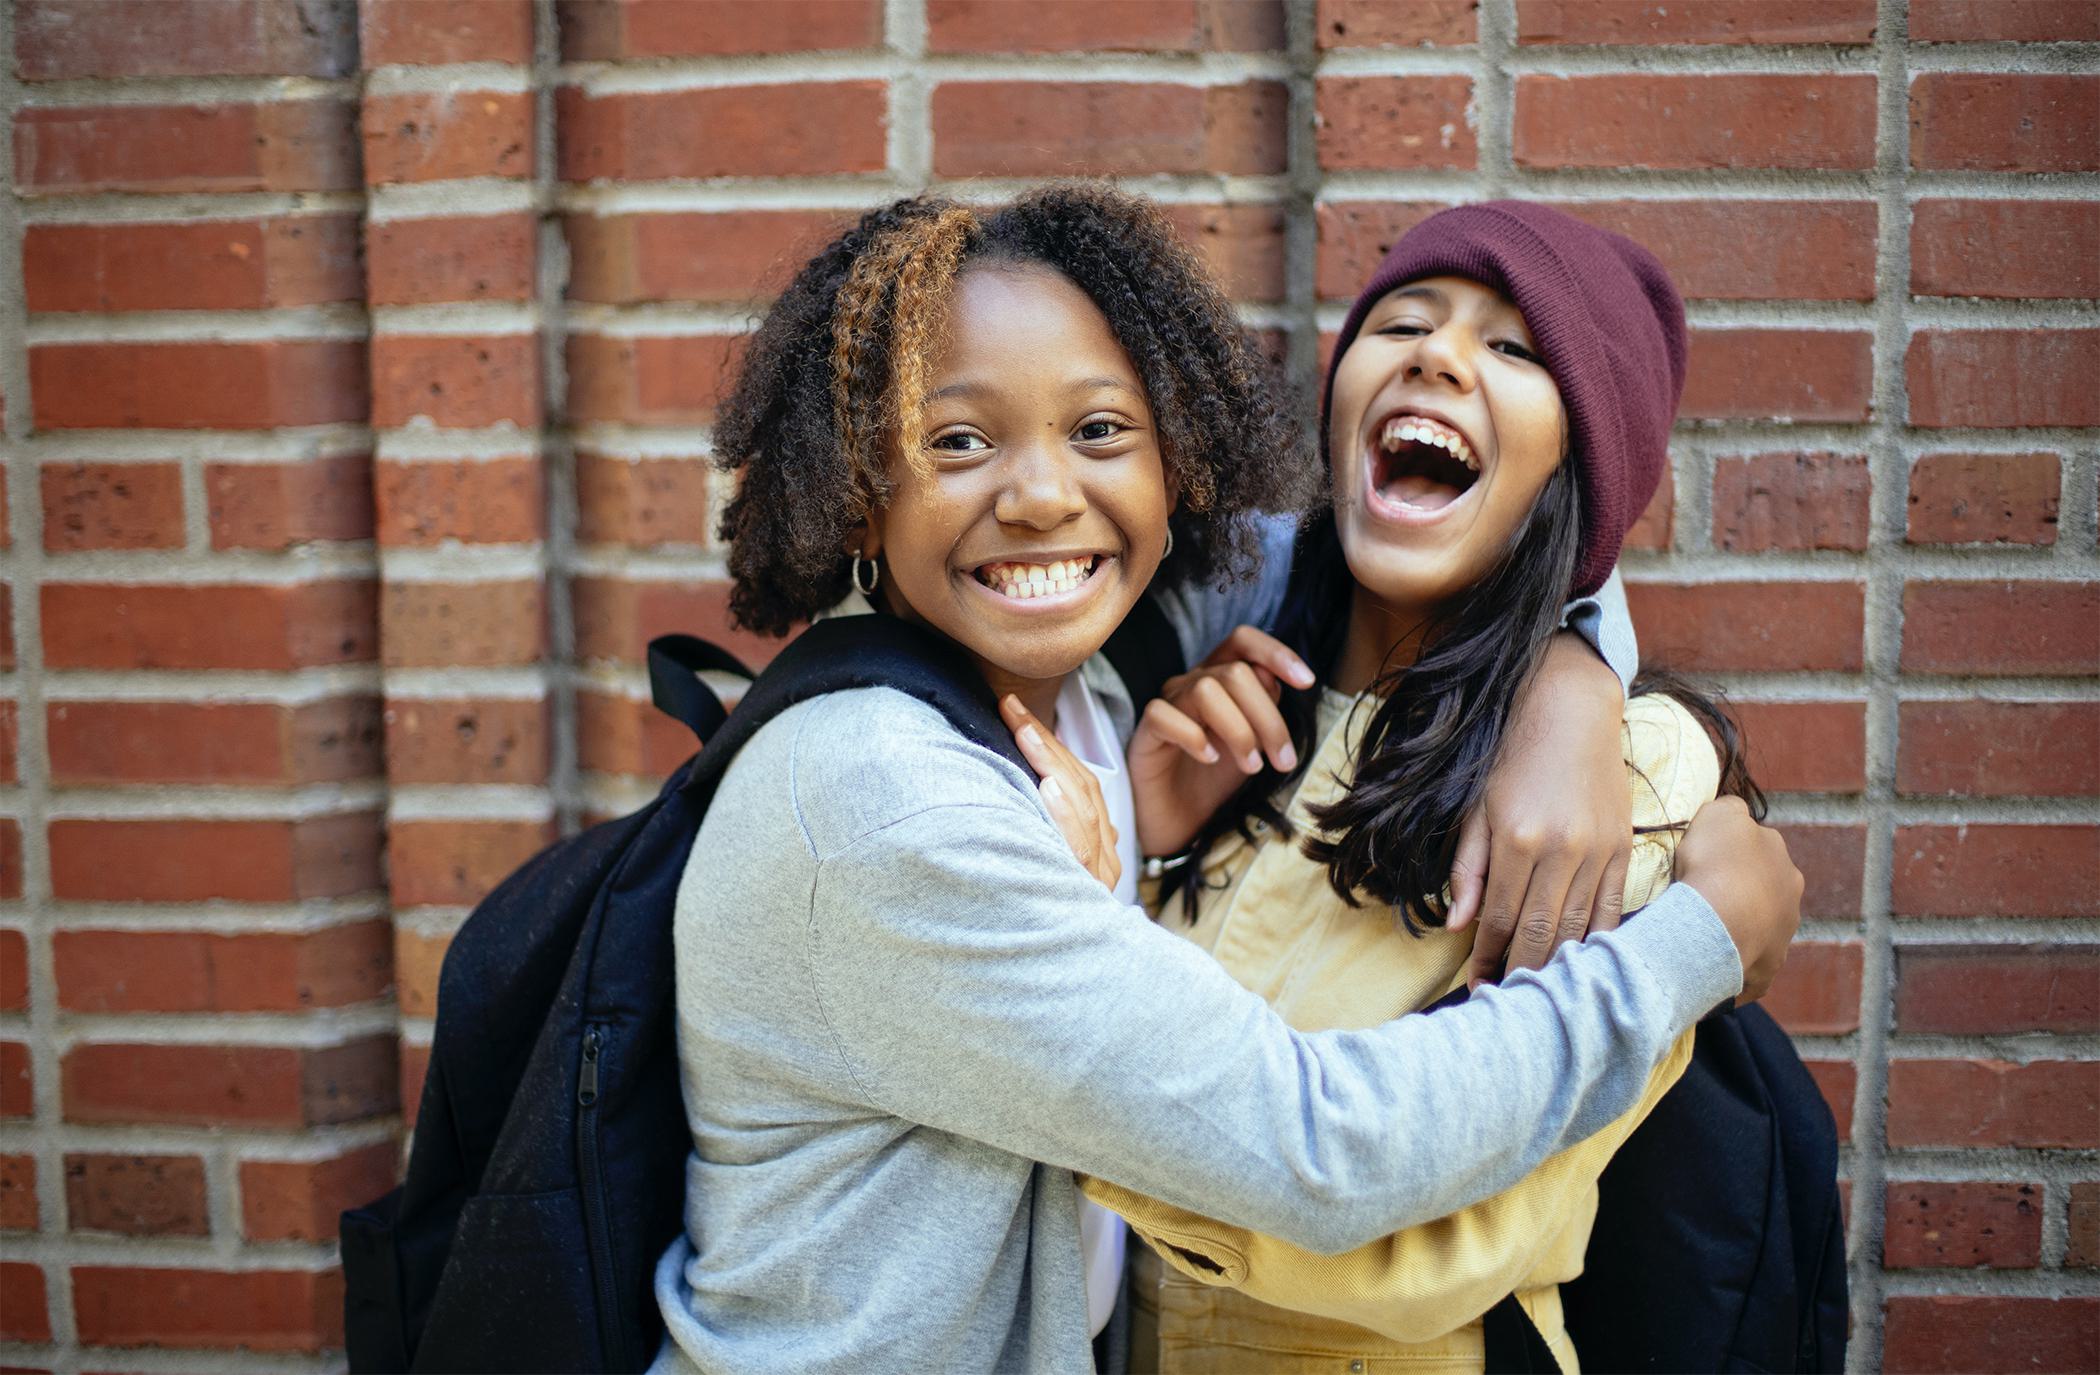 Two girls with backpacks that are hugging and laughing in front of a red brick wall.